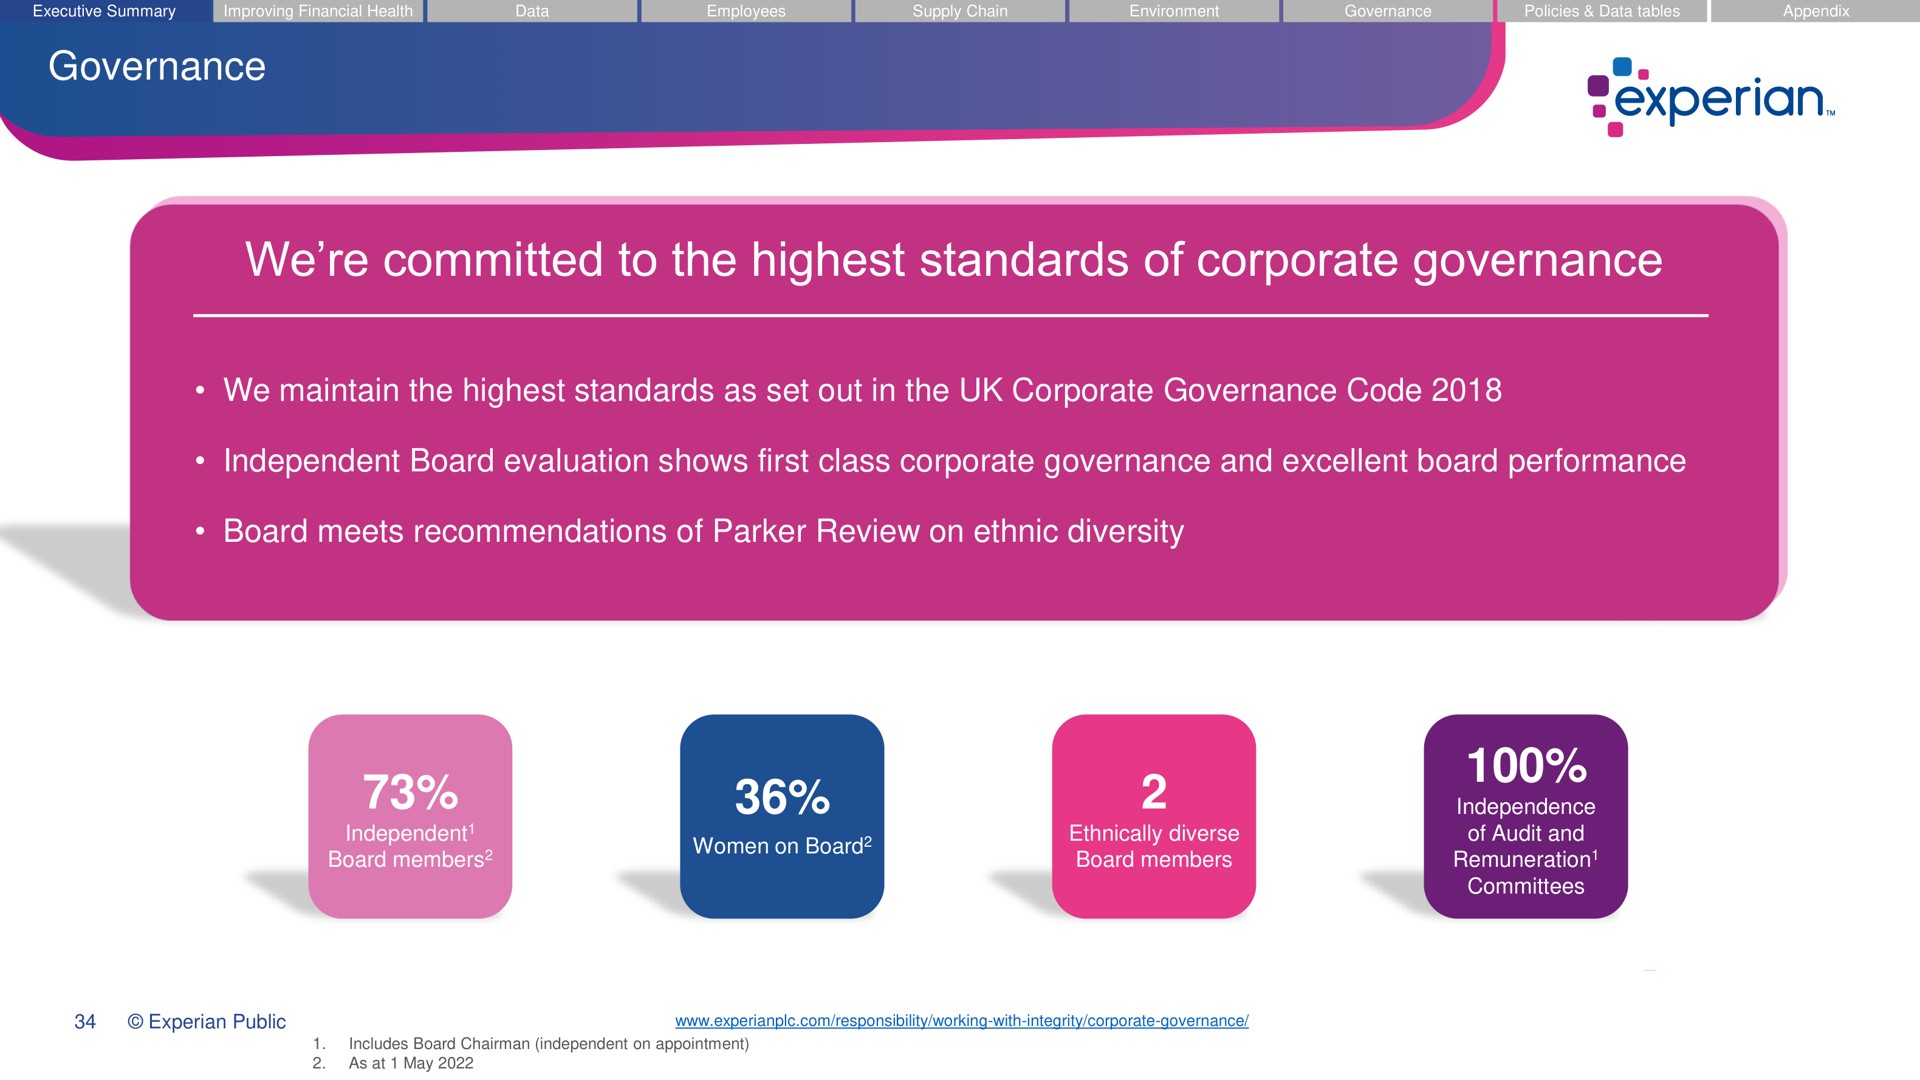 governance we committed to the highest standards of corporate governance we maintain the highest standards as set out in the corporate governance code independent board evaluation shows first class corporate governance and excellent board performance board meets recommendations of parker review on ethnic diversity tew | Experian